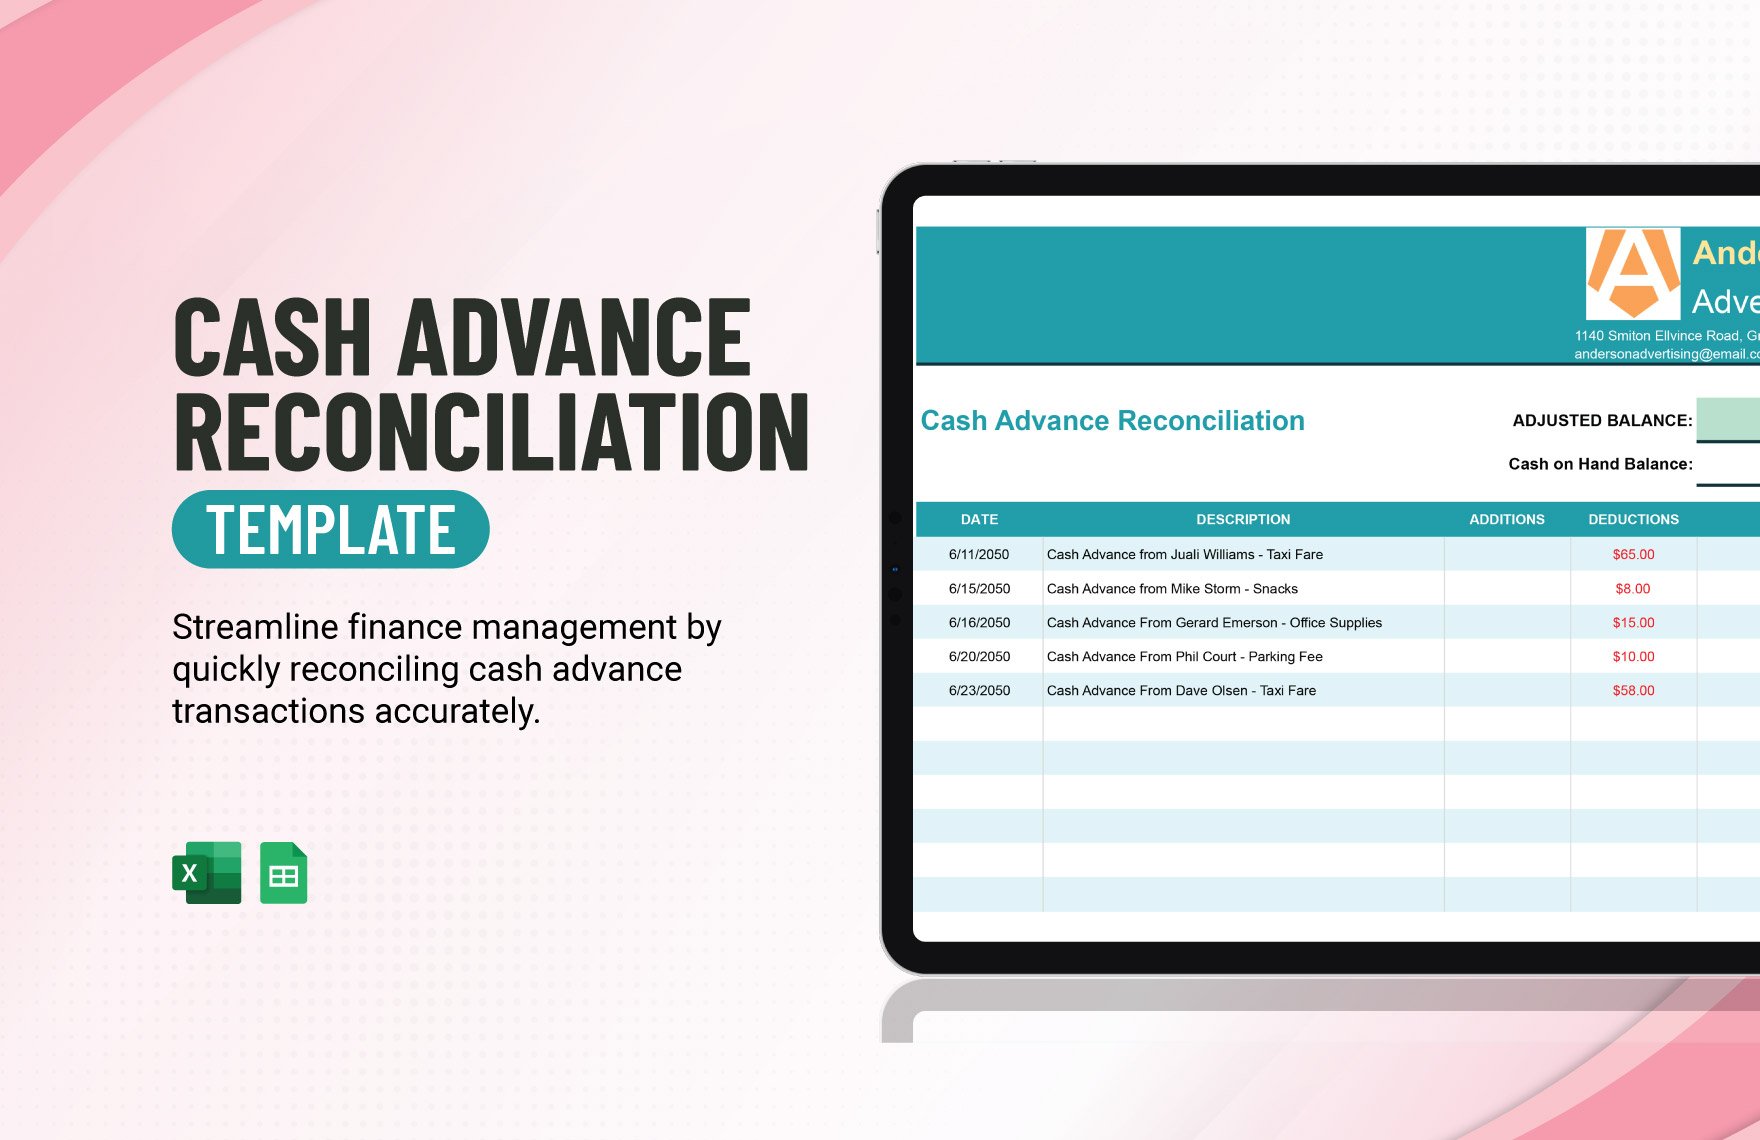 Cash Advance Reconciliation Template in Excel, Google Sheets